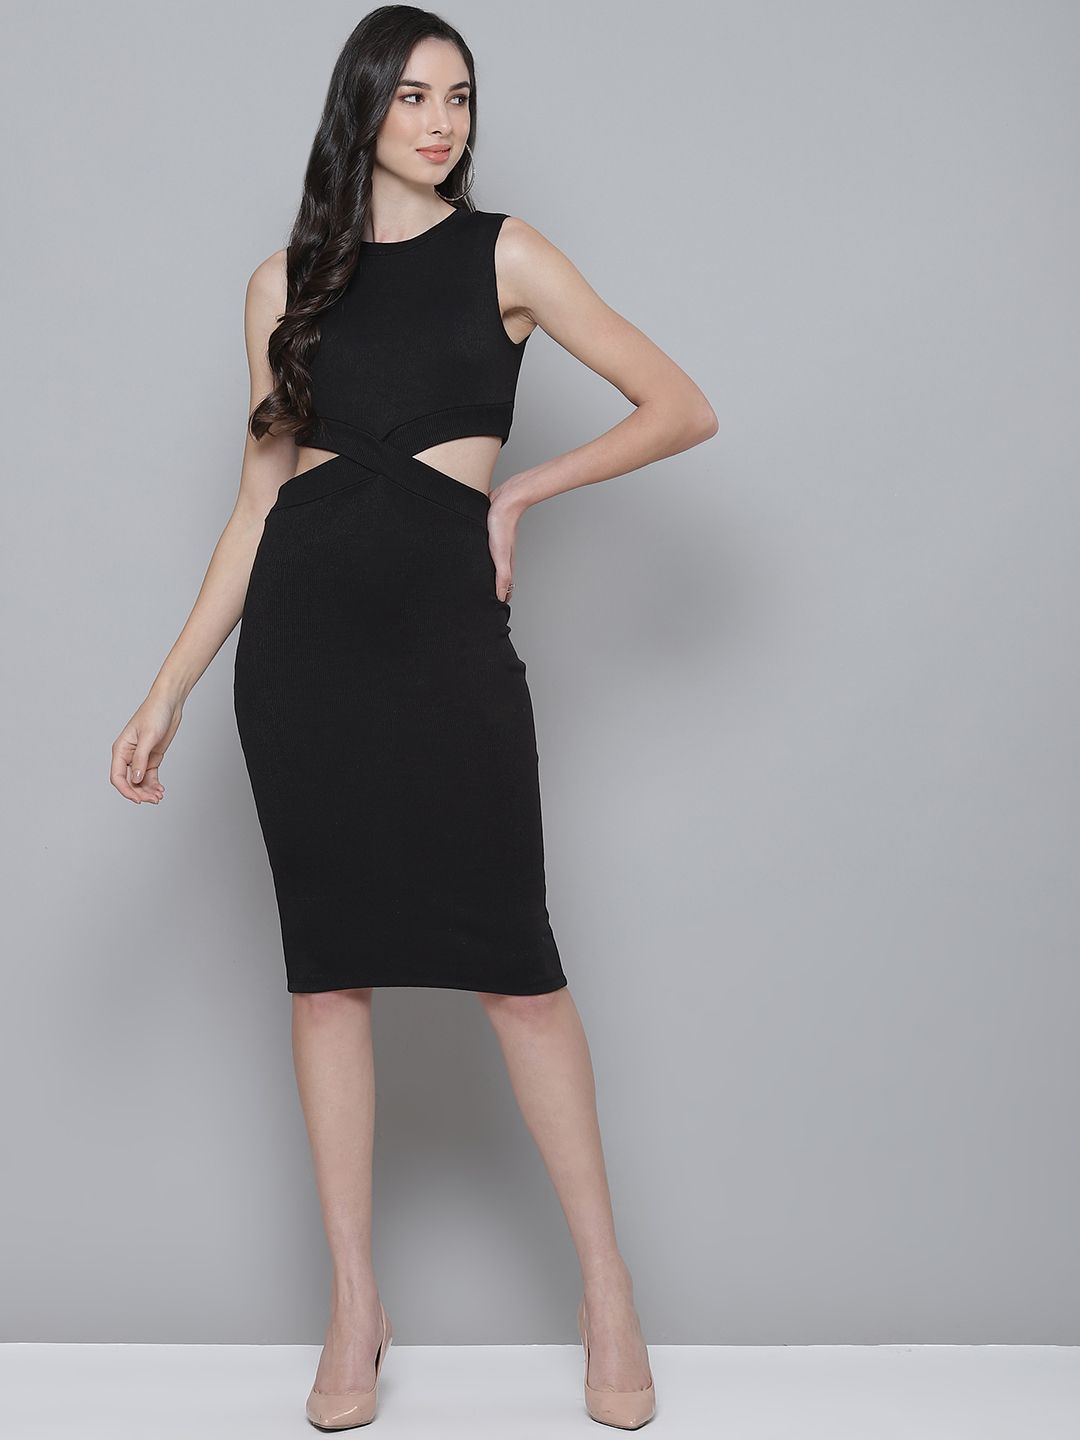 SASSAFRAS Black Ribbed Cut-Out Bodycon Dress Price in India